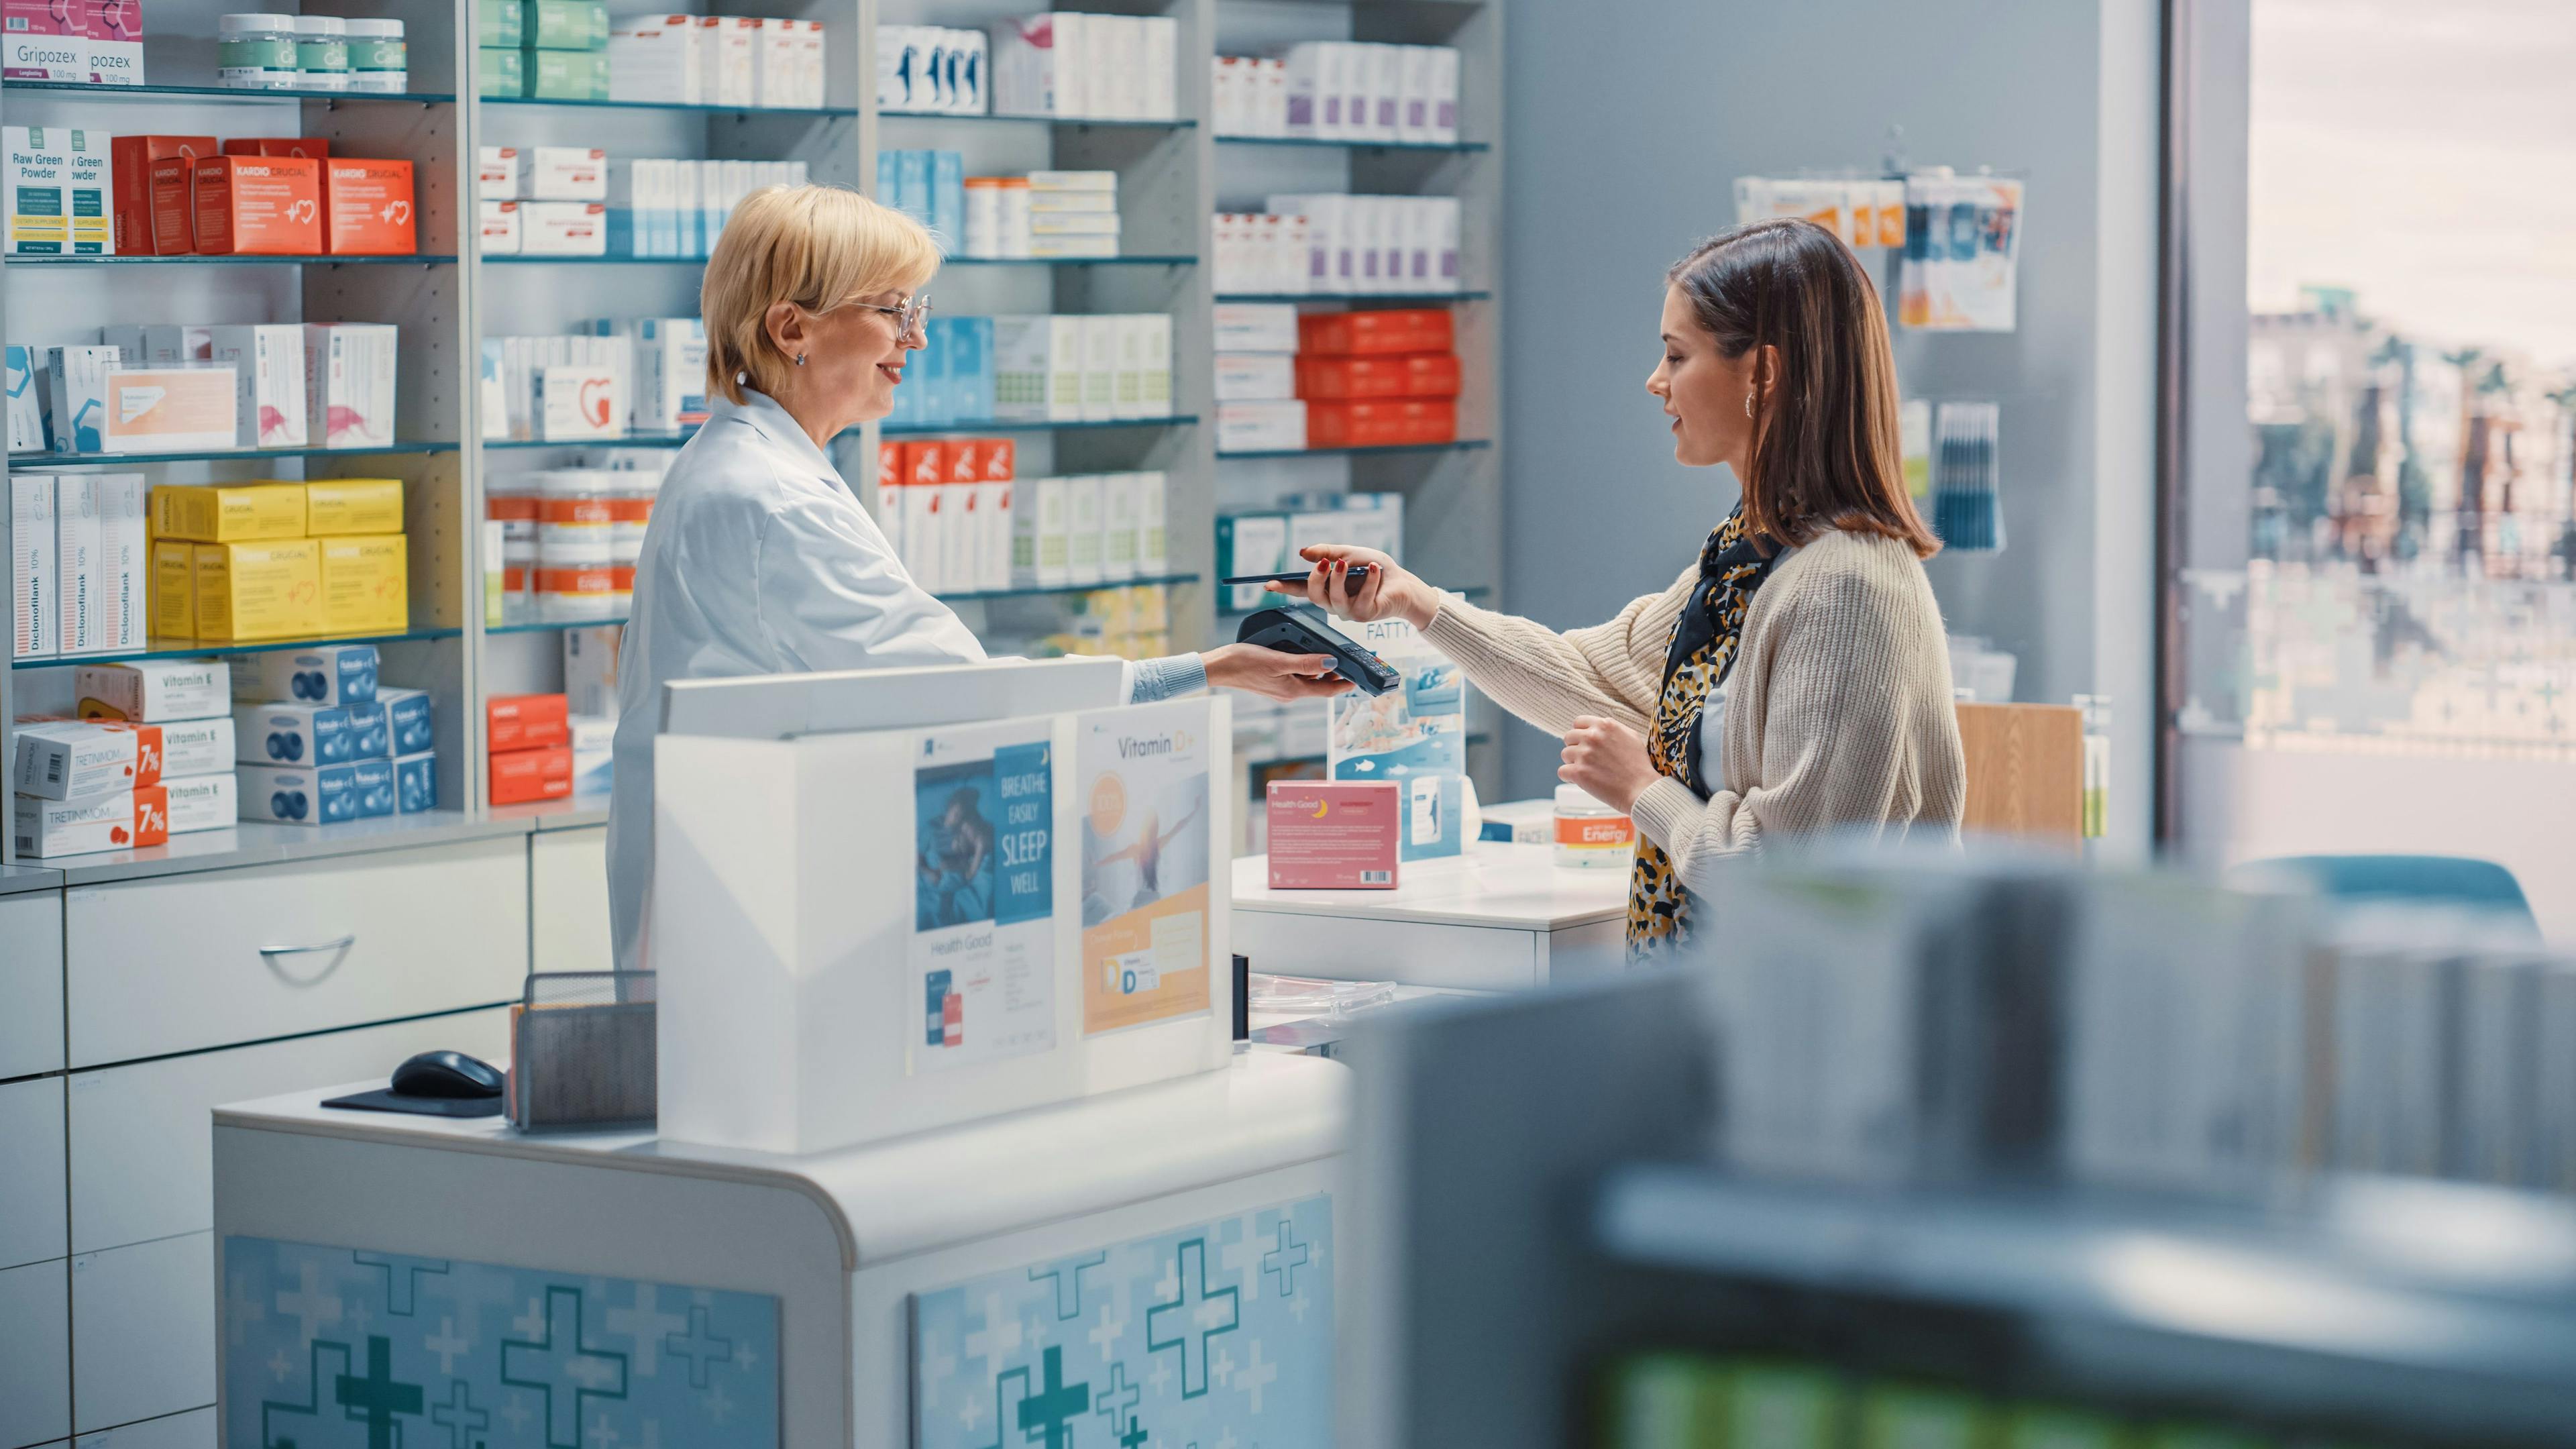 Pharmacy Drugstore Checkout Cashier Counter: Mature Female Pharmacist and Young Woman Using Contactless Payment NFC Smartphone to Buy Prescription Medicine, Vitamins, Beauty, Health Care Products - Image credit: Gorodenkoff | stock.adobe.com